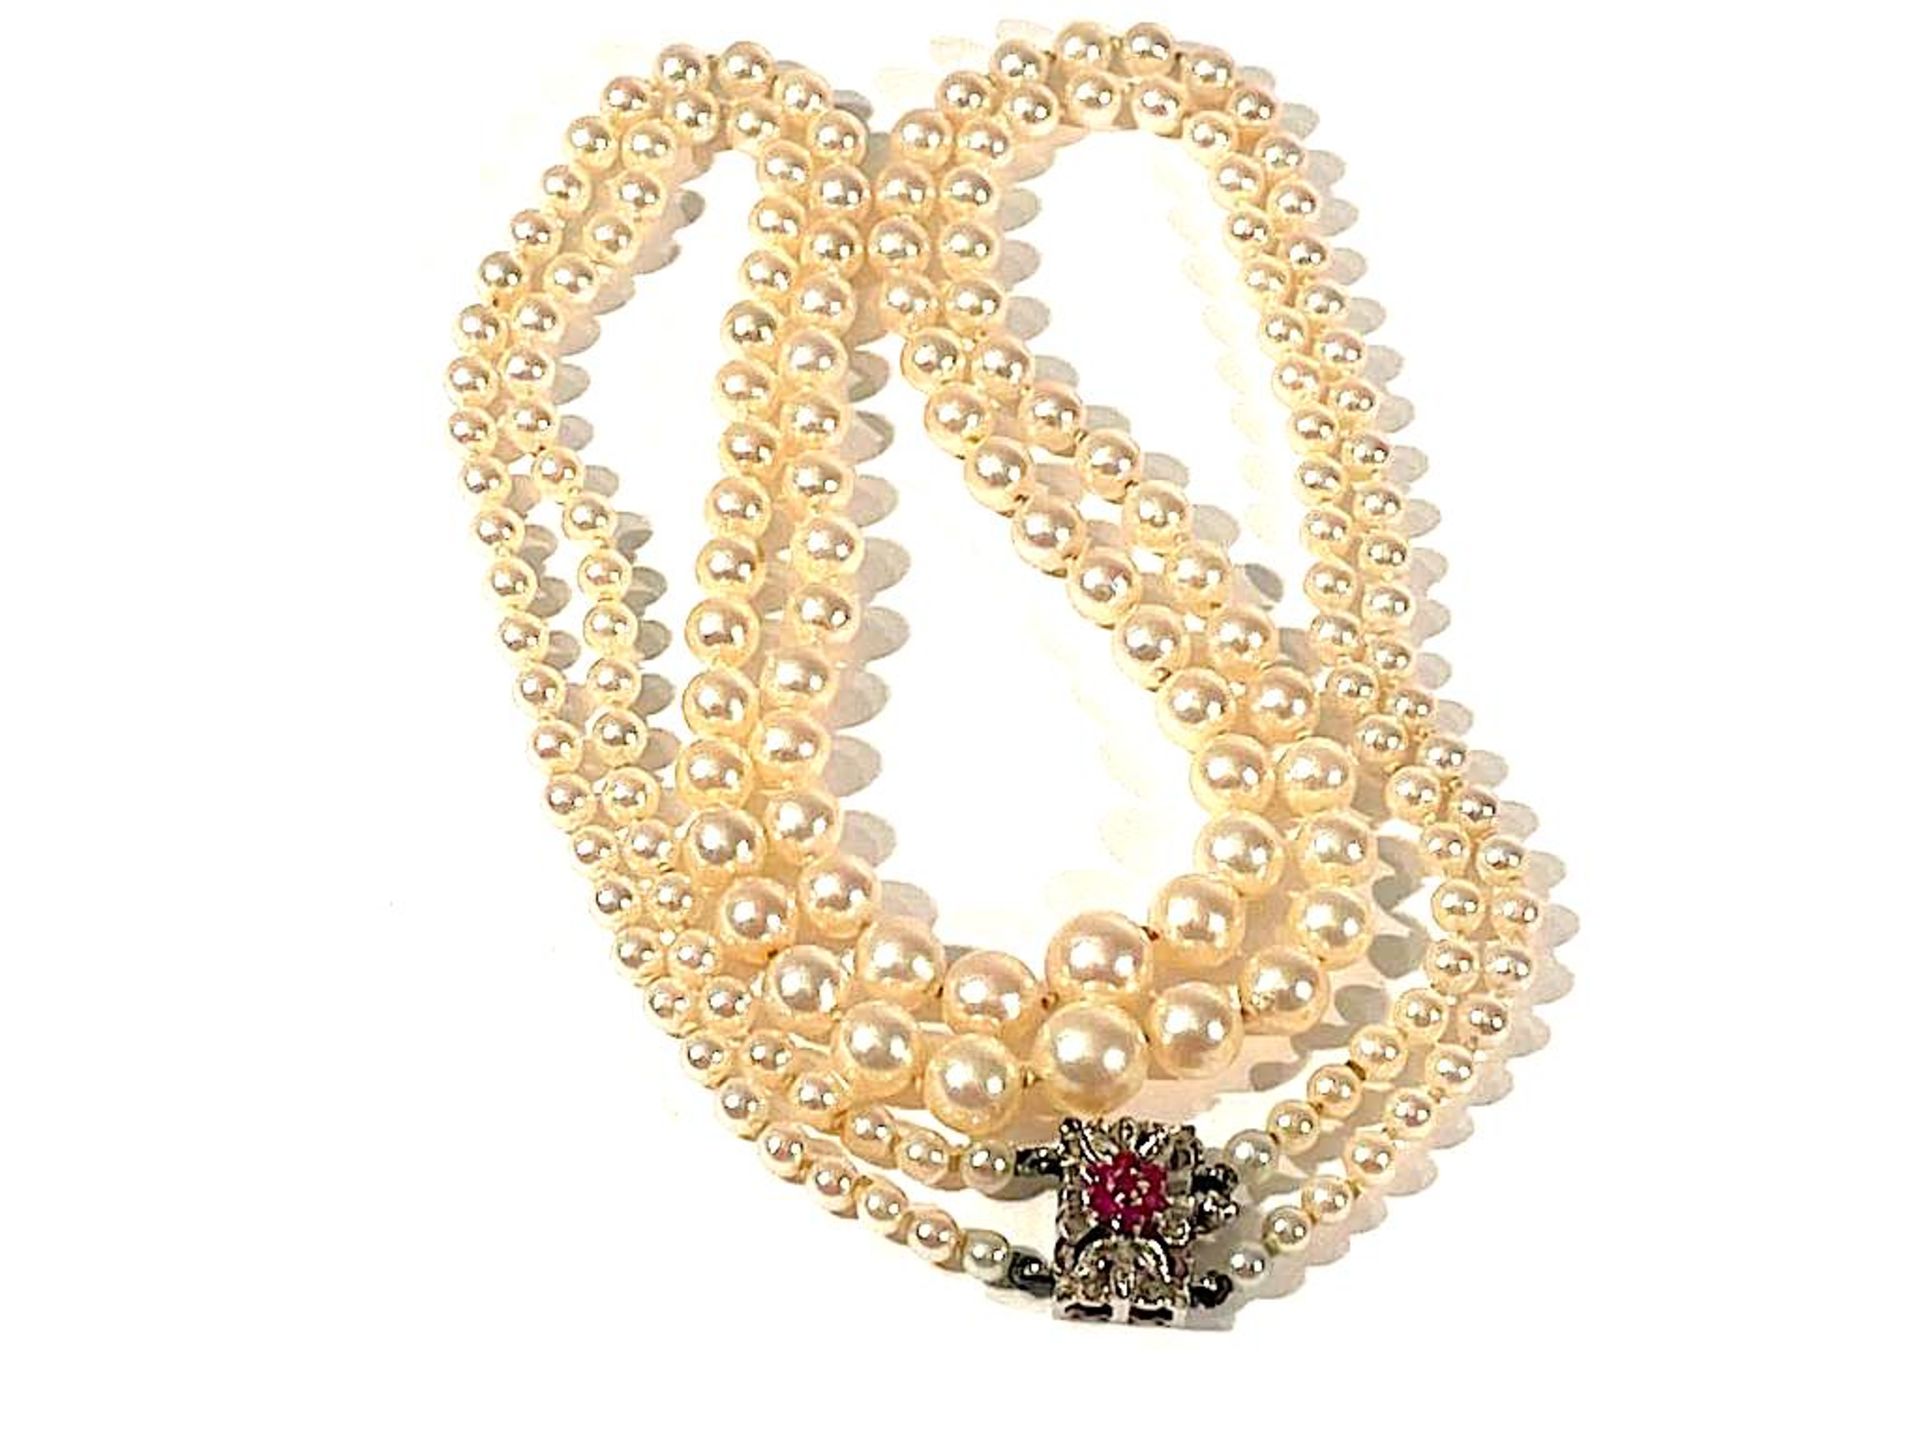 Pearl necklace - Image 2 of 10